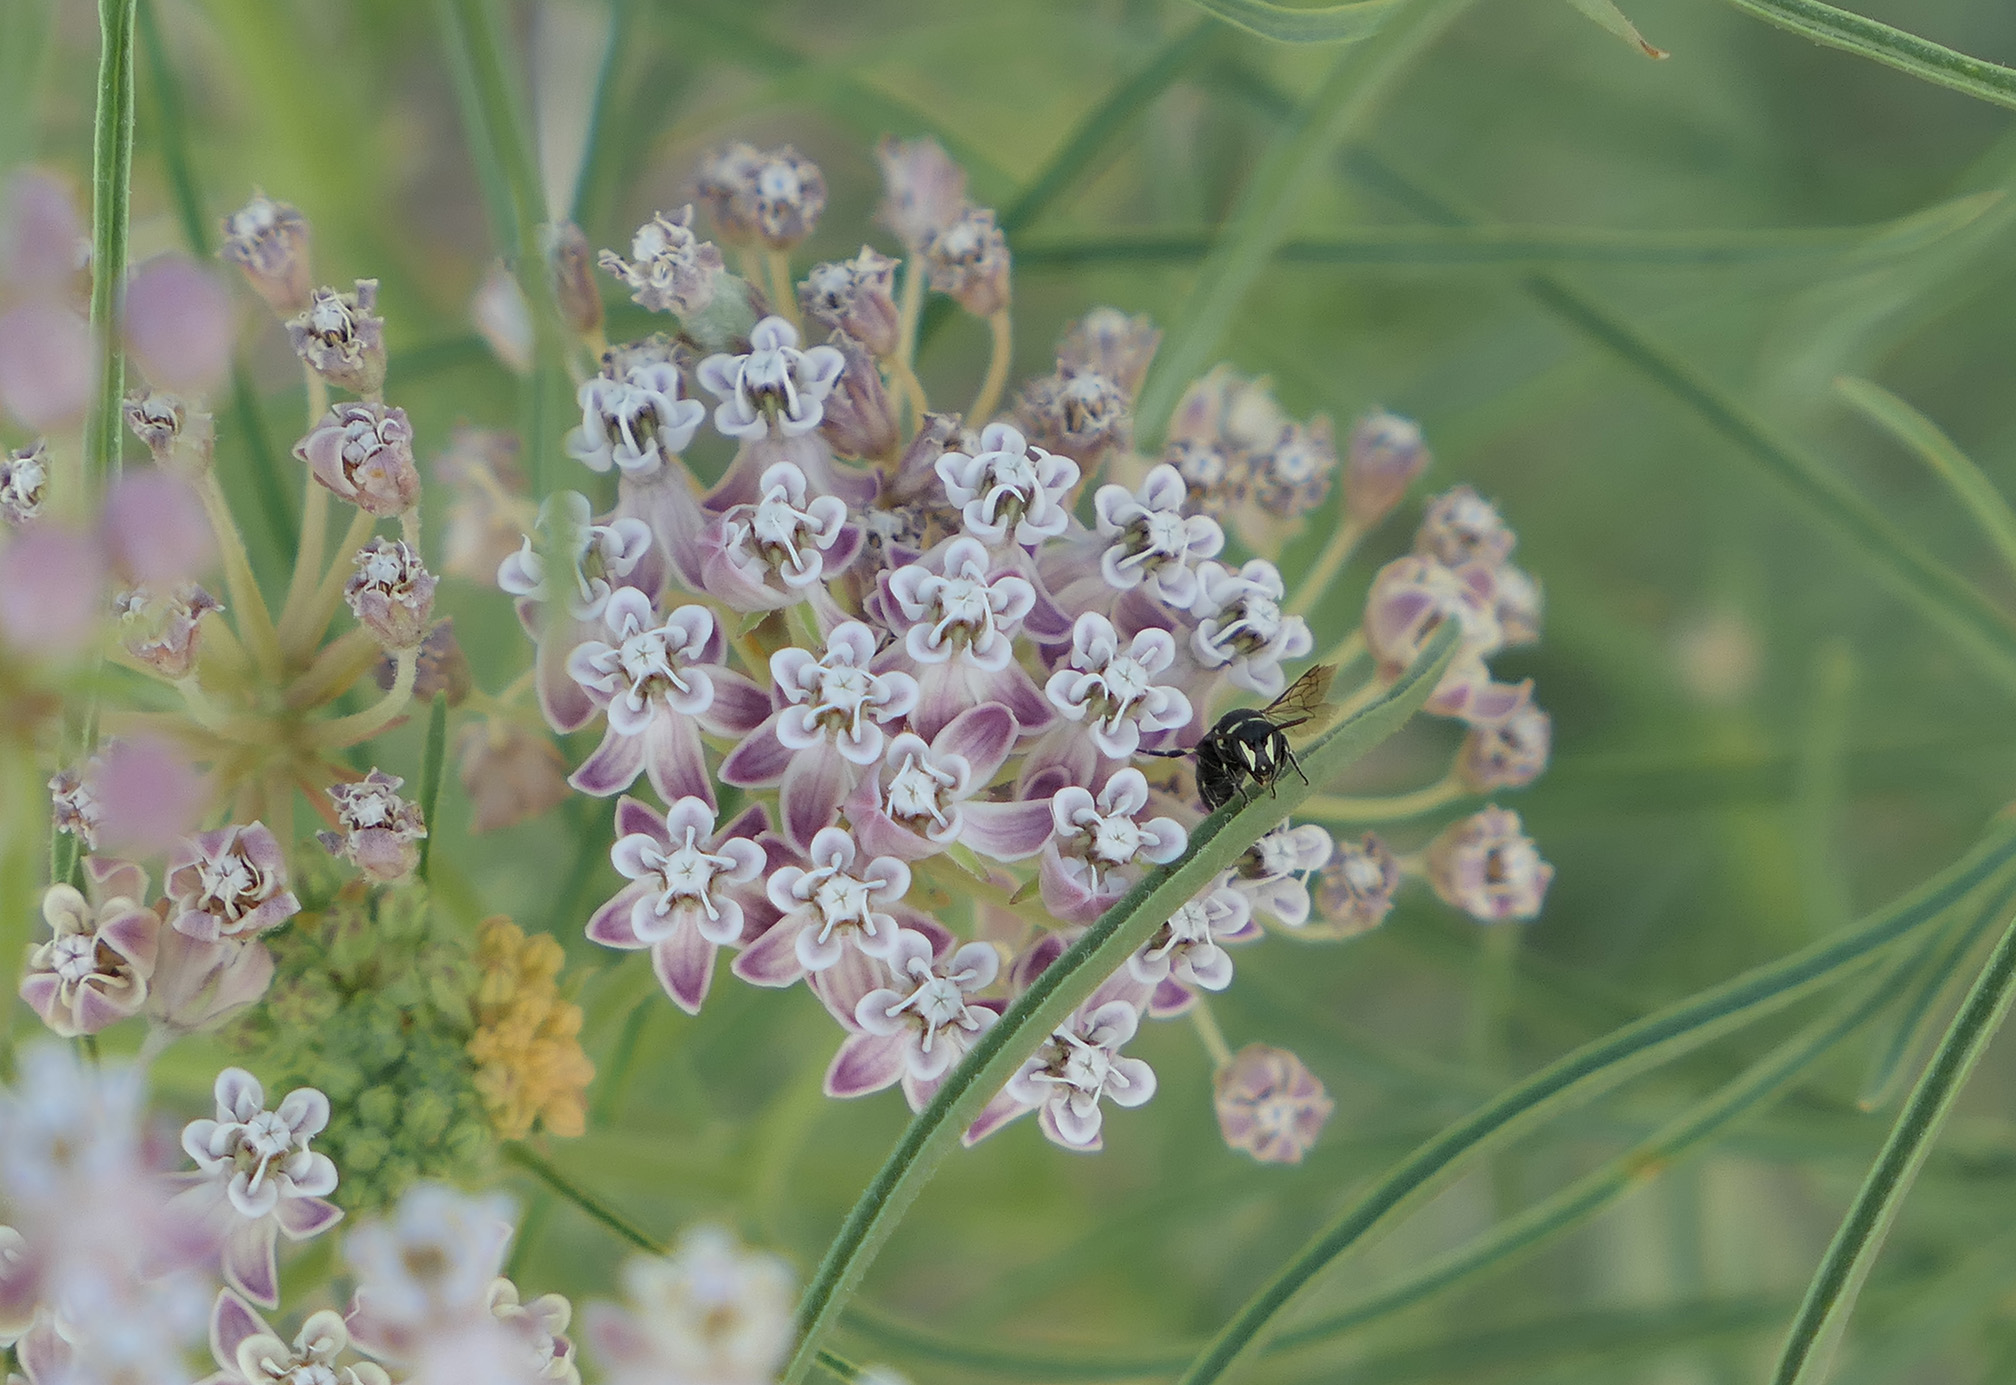 A cluster of pink-and-white flowers form the head of a milkweed plant. On the flowers is a bee. The bee is black with yellow markings on its face.